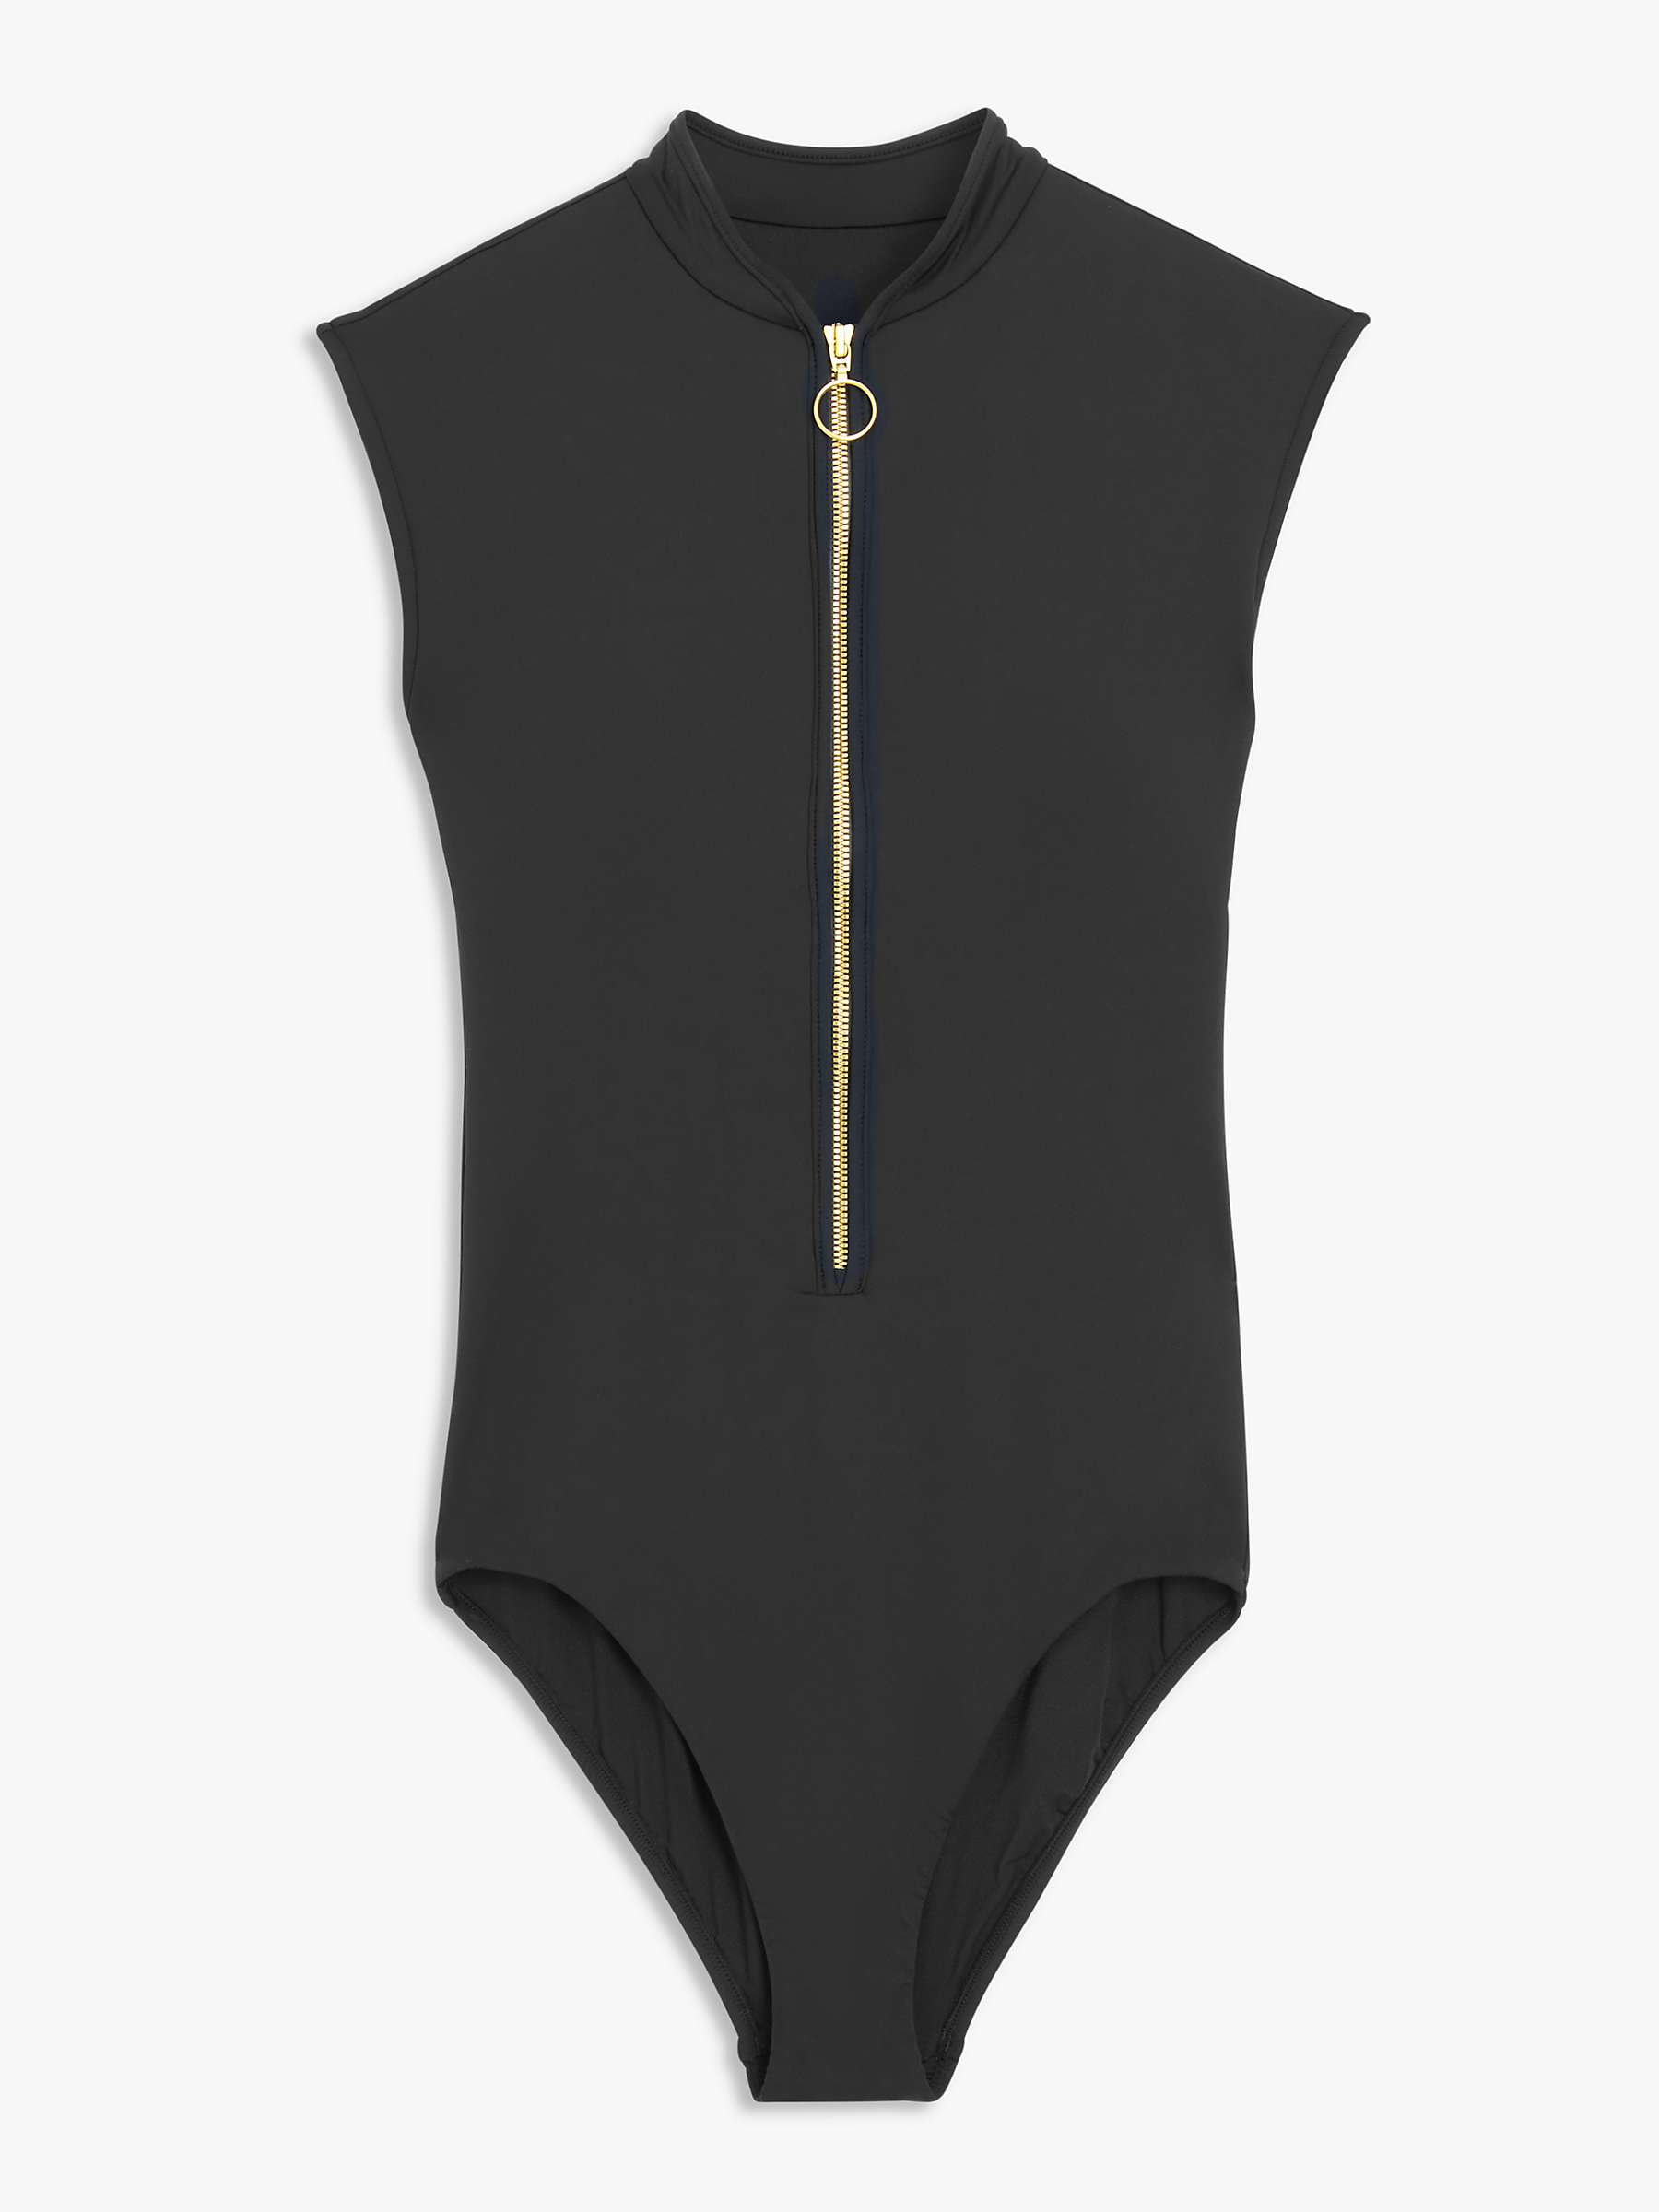 Buy Seafolly Zip Front One Piece Swimsuit, Black Online at johnlewis.com